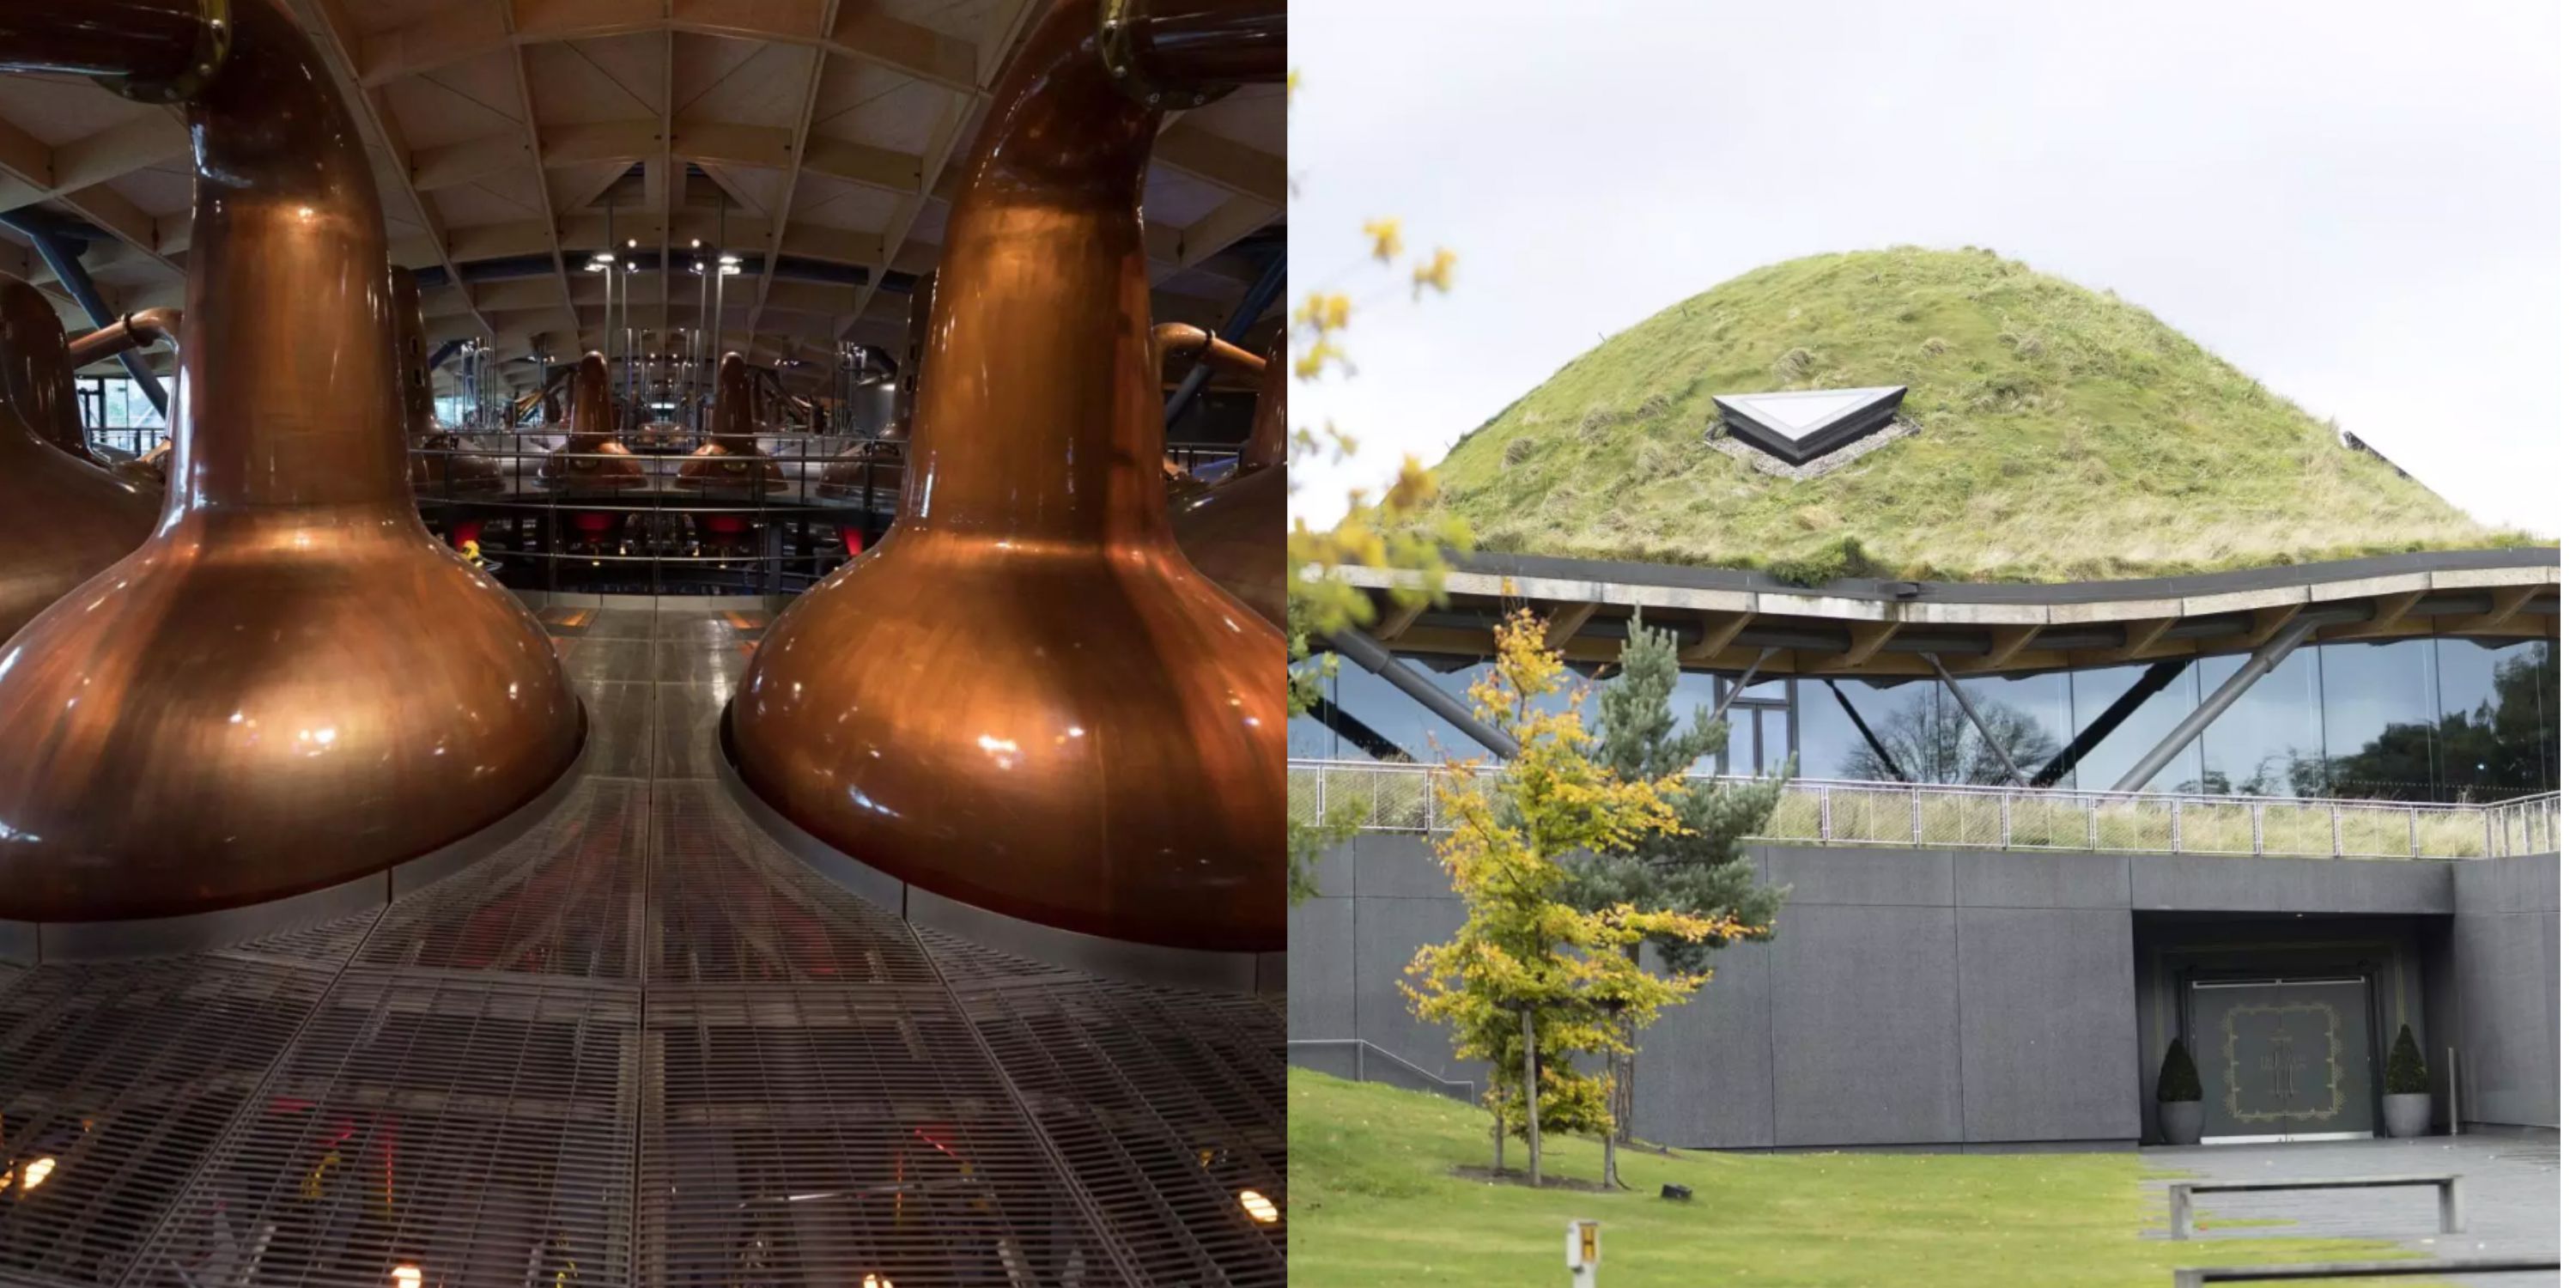 <p>Location<b>: </b>The Macallan Distillery, Easter Elchies, Craigellachie, Moray, Scotland, AB38 9RX</p><p>Contact Info: +44 1340 872280, themacallan.com</p><p>Nestled in the heart of Scotland's Speyside region, The Macallan Distillery is renowned for its exquisite single-malt Scotch whiskies. A visit to this iconic distillery, set amid the stunning Scottish Highlands, provides an immersive experience, including guided tours that showcase the brand's dedication to craftsmanship and attention to detail. The Macallan's Visitor Center offers an interactive exhibit, a gourmet restaurant, and a well-stocked bar where you can sample some of the rarest and most exclusive Macallan whiskies. Aficionados will appreciate the opportunity to indulge in a dram or two while soaking in the breathtaking scenery.</p>